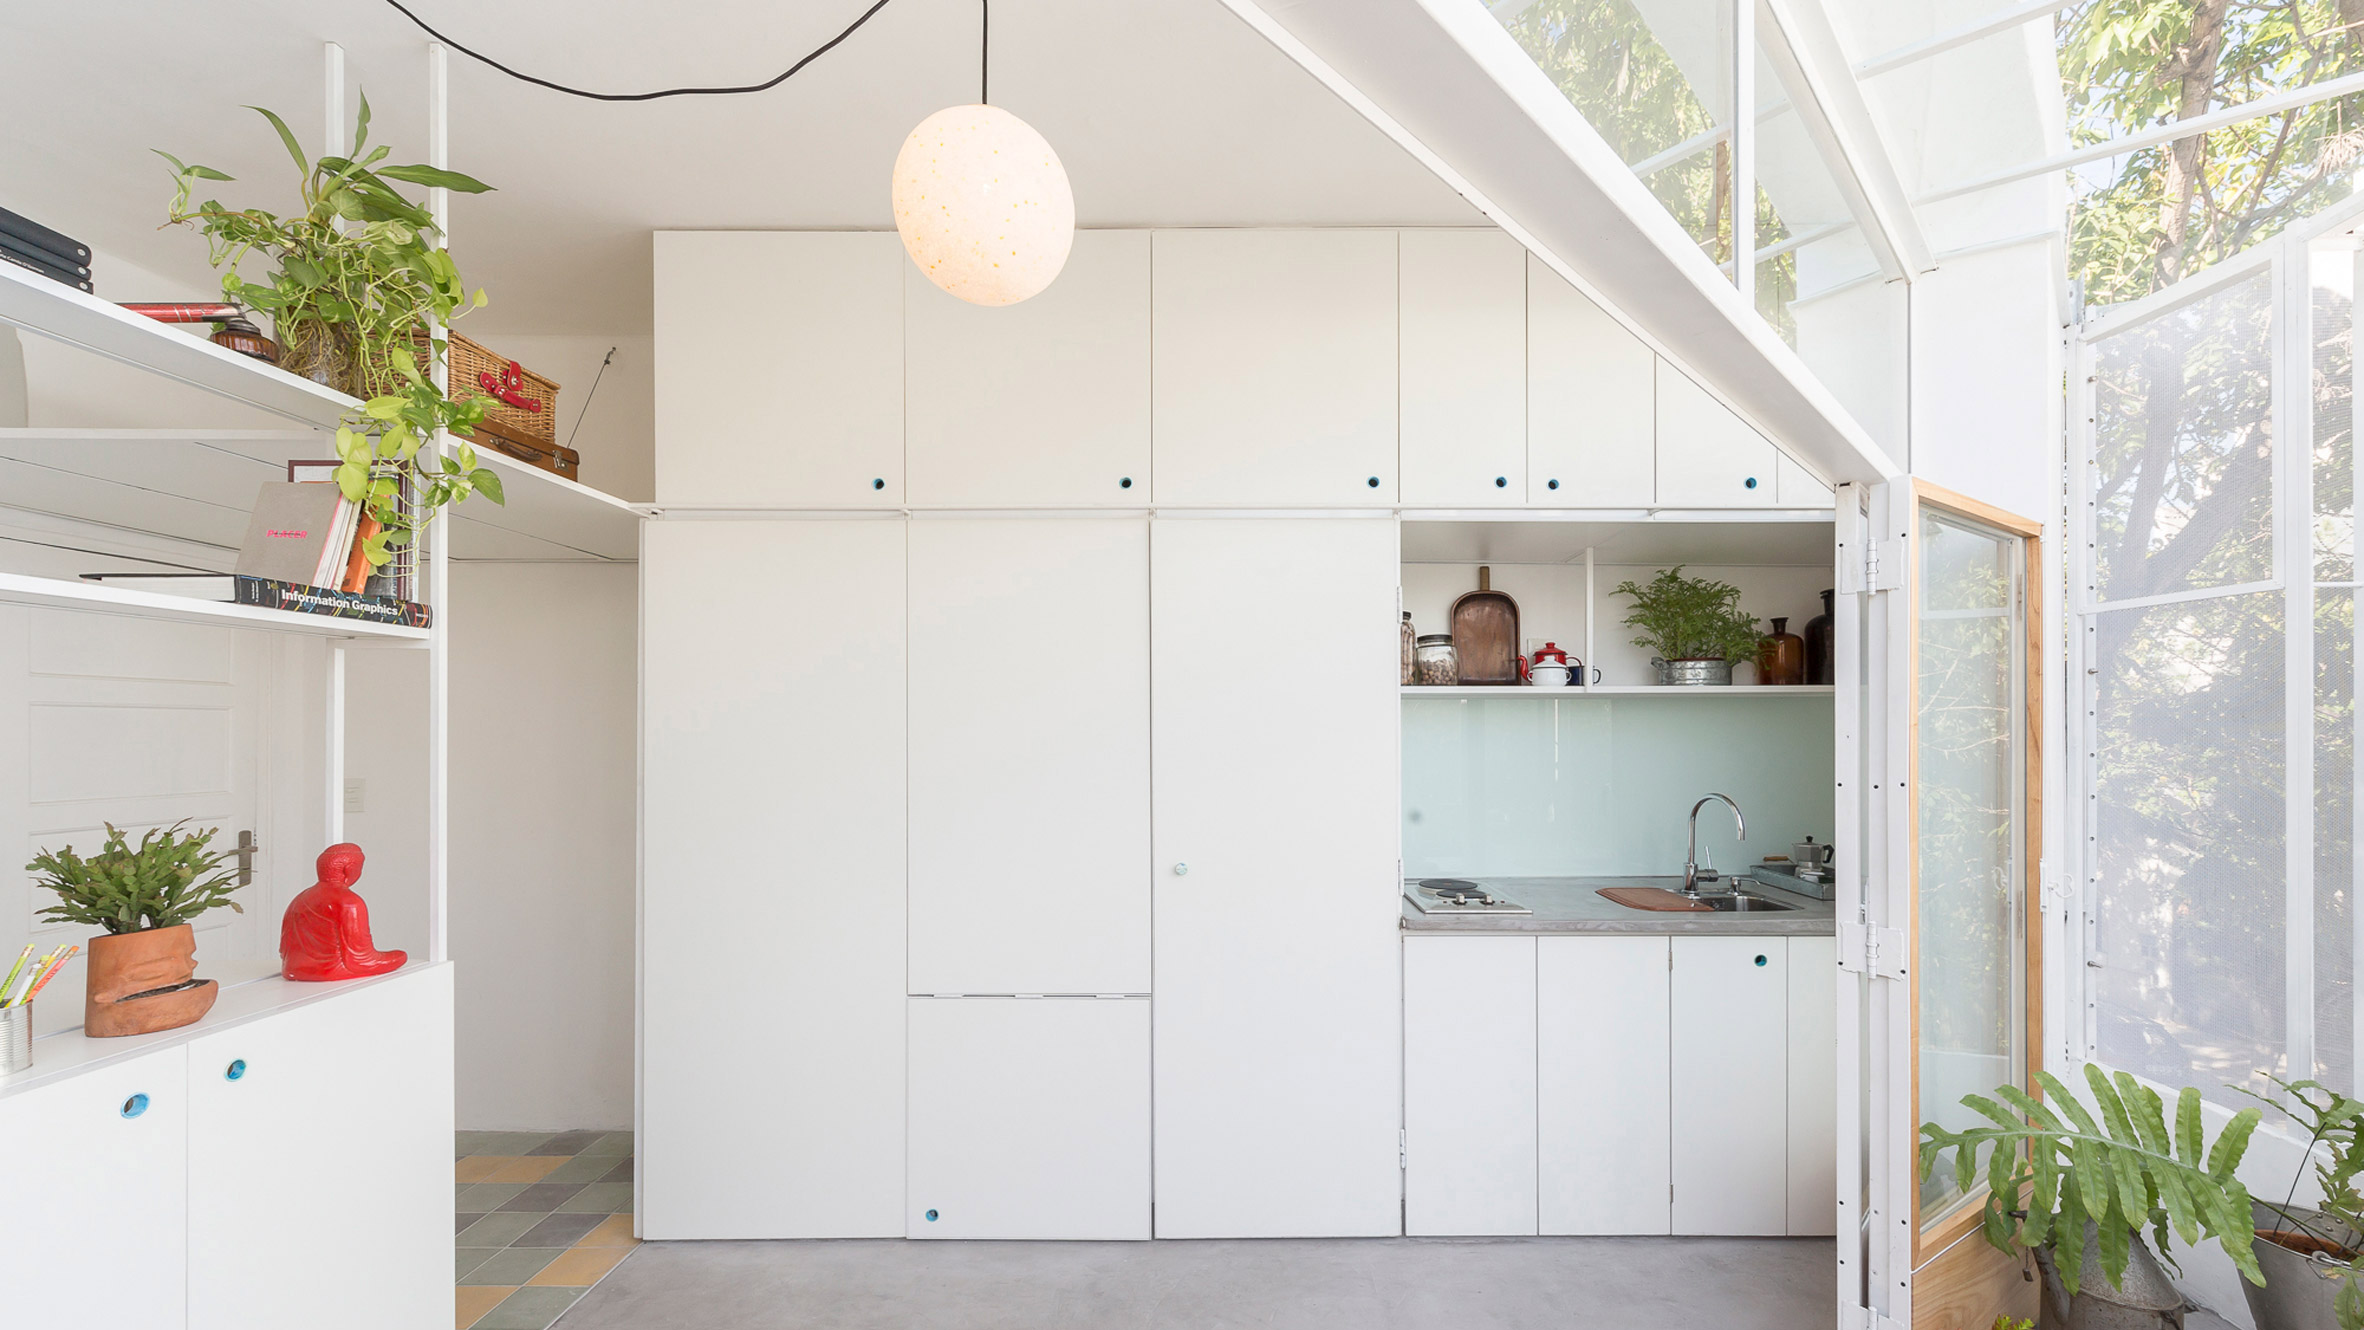 Ten compact kitchens by architects that make the most of limited space